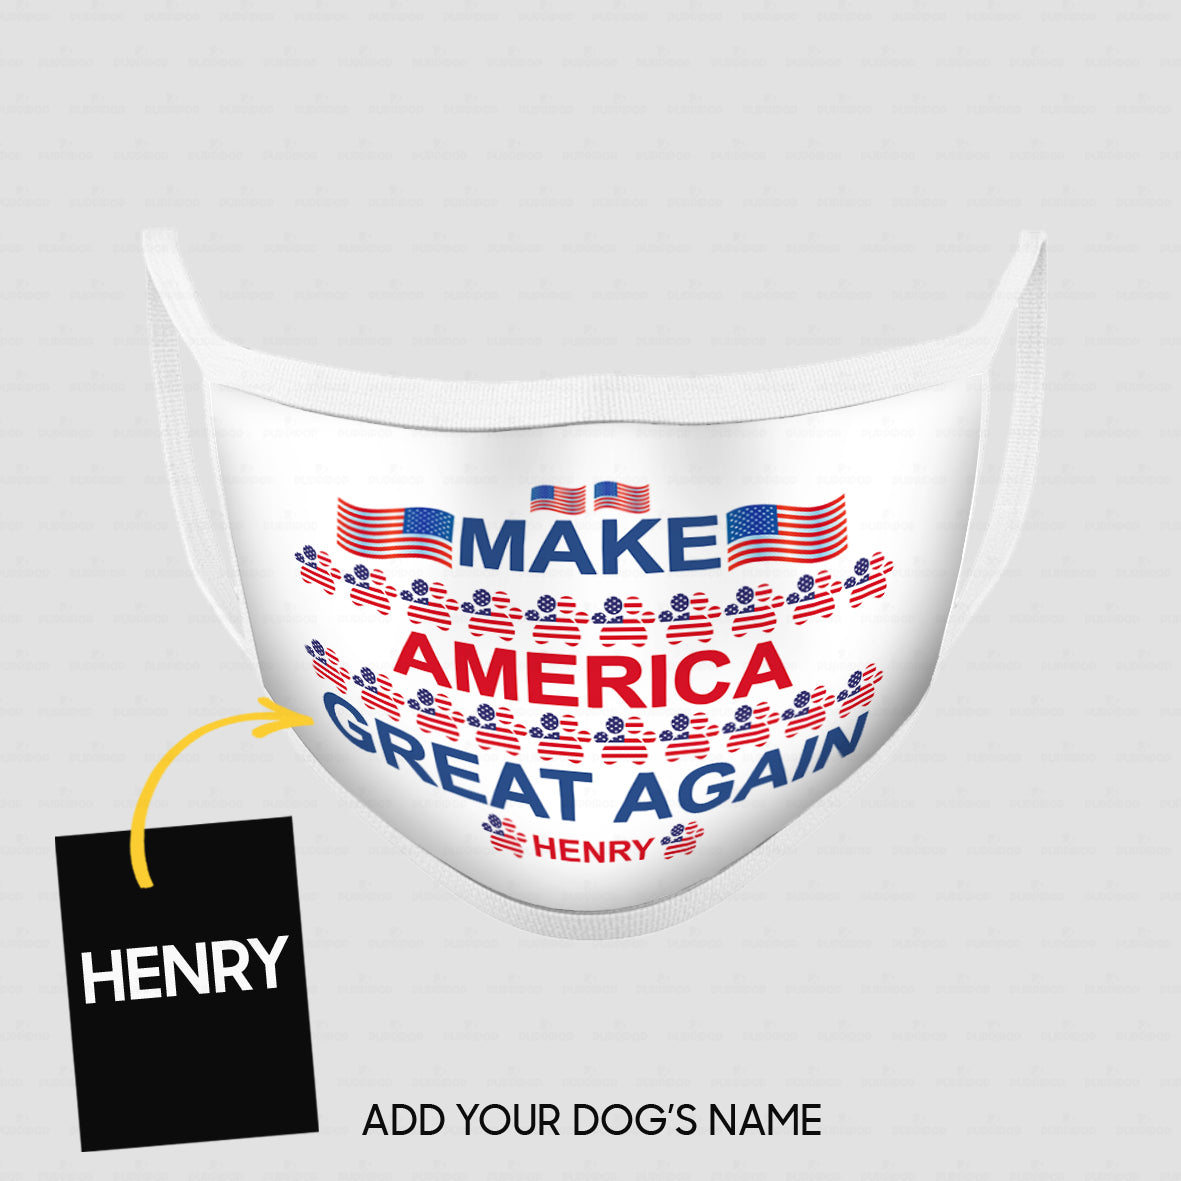 Personalized Dog Gift Idea - Make America Great Again With Paws And Flags For Dog Lovers - Cloth Mask